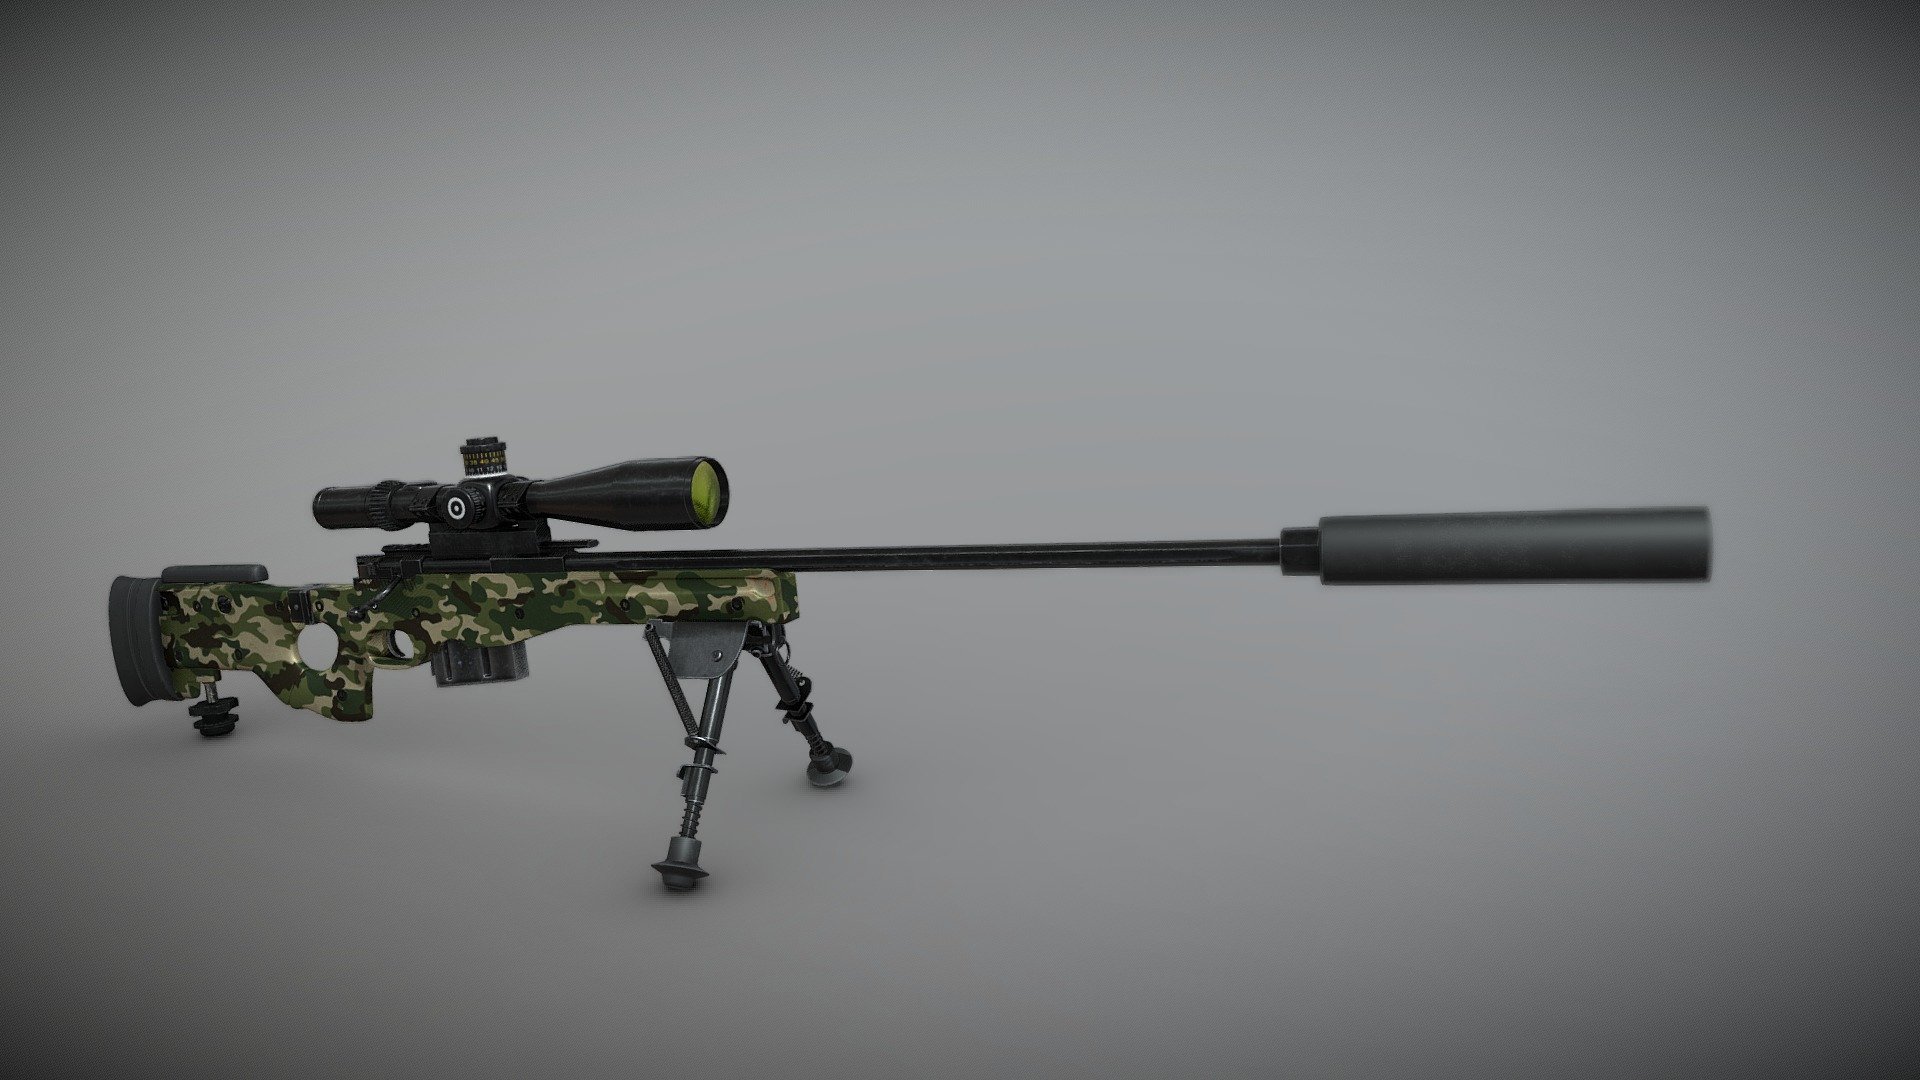 Introducing a stunning high-poly 3D AWM Sniper Rifle, expertly crafted using Blender and textured in Substance Painter! This incredible model is sure to impress, featuring intricate details and realistic textures that bring it to life in stunning 3D. The rifle's sleek design, durable construction, and intricate engravings make it the perfect addition to any game or project that requires a powerful and visually striking weapon

Whether you're designing a game, creating a 3D animation, or simply looking to add a powerful and visually striking weapon to your virtual world, this AWM Sniper Rifle is sure to exceed your expectations. With its precise design, attention to detail, and stunning texture work, this model is an incredible addition to any 3D artist's toolkit. Don't miss out on the opportunity to add this incredible high-poly AWM Sniper Rifle to your collection today! - Highpoly AWM Sniper Rifle - 3D model by taherk 3d model